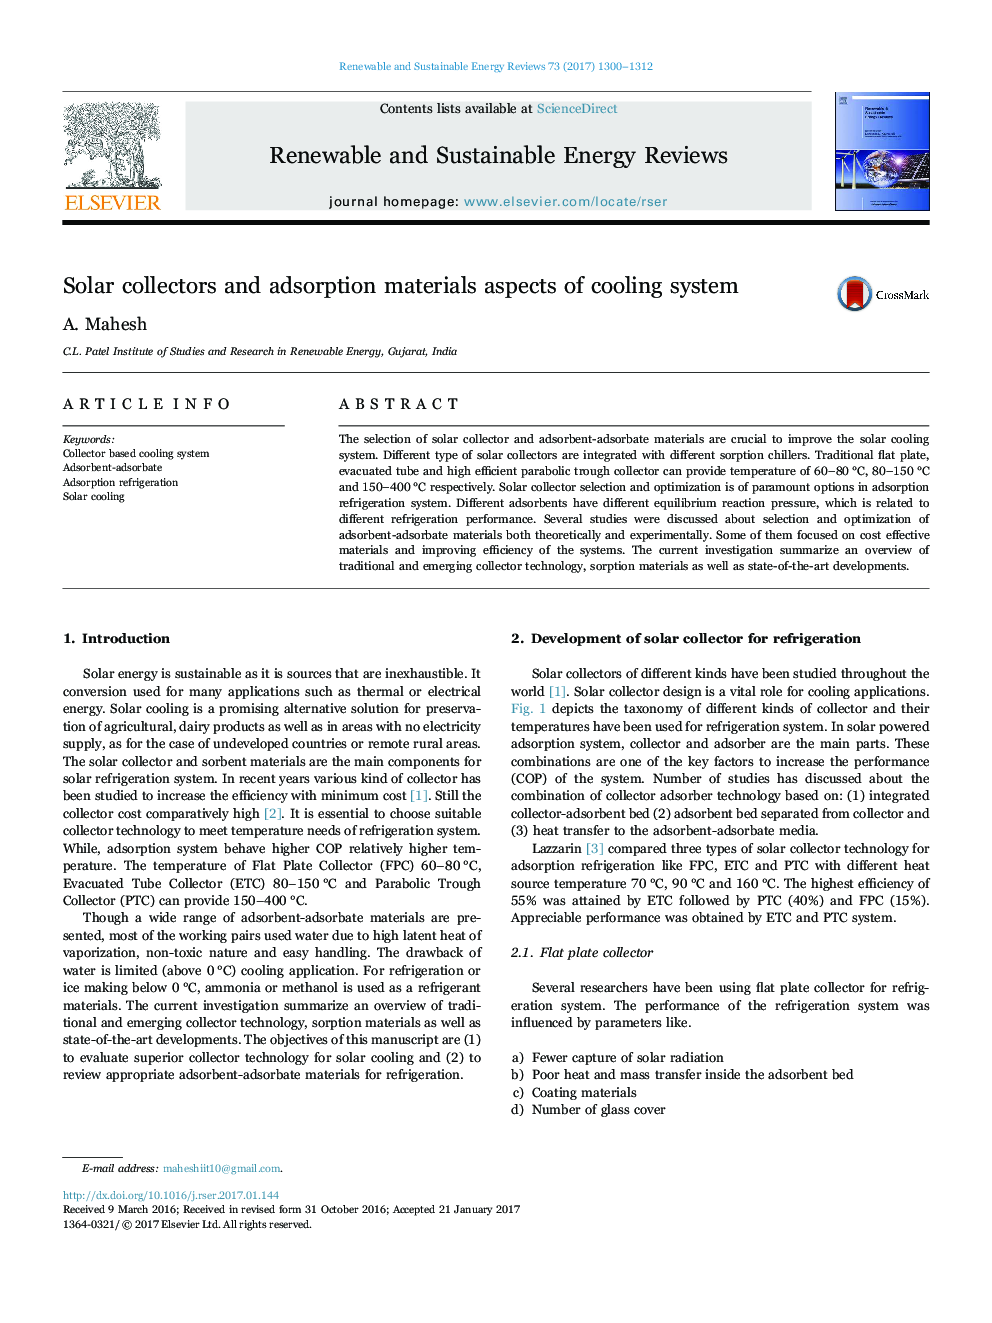 Solar collectors and adsorption materials aspects of cooling system